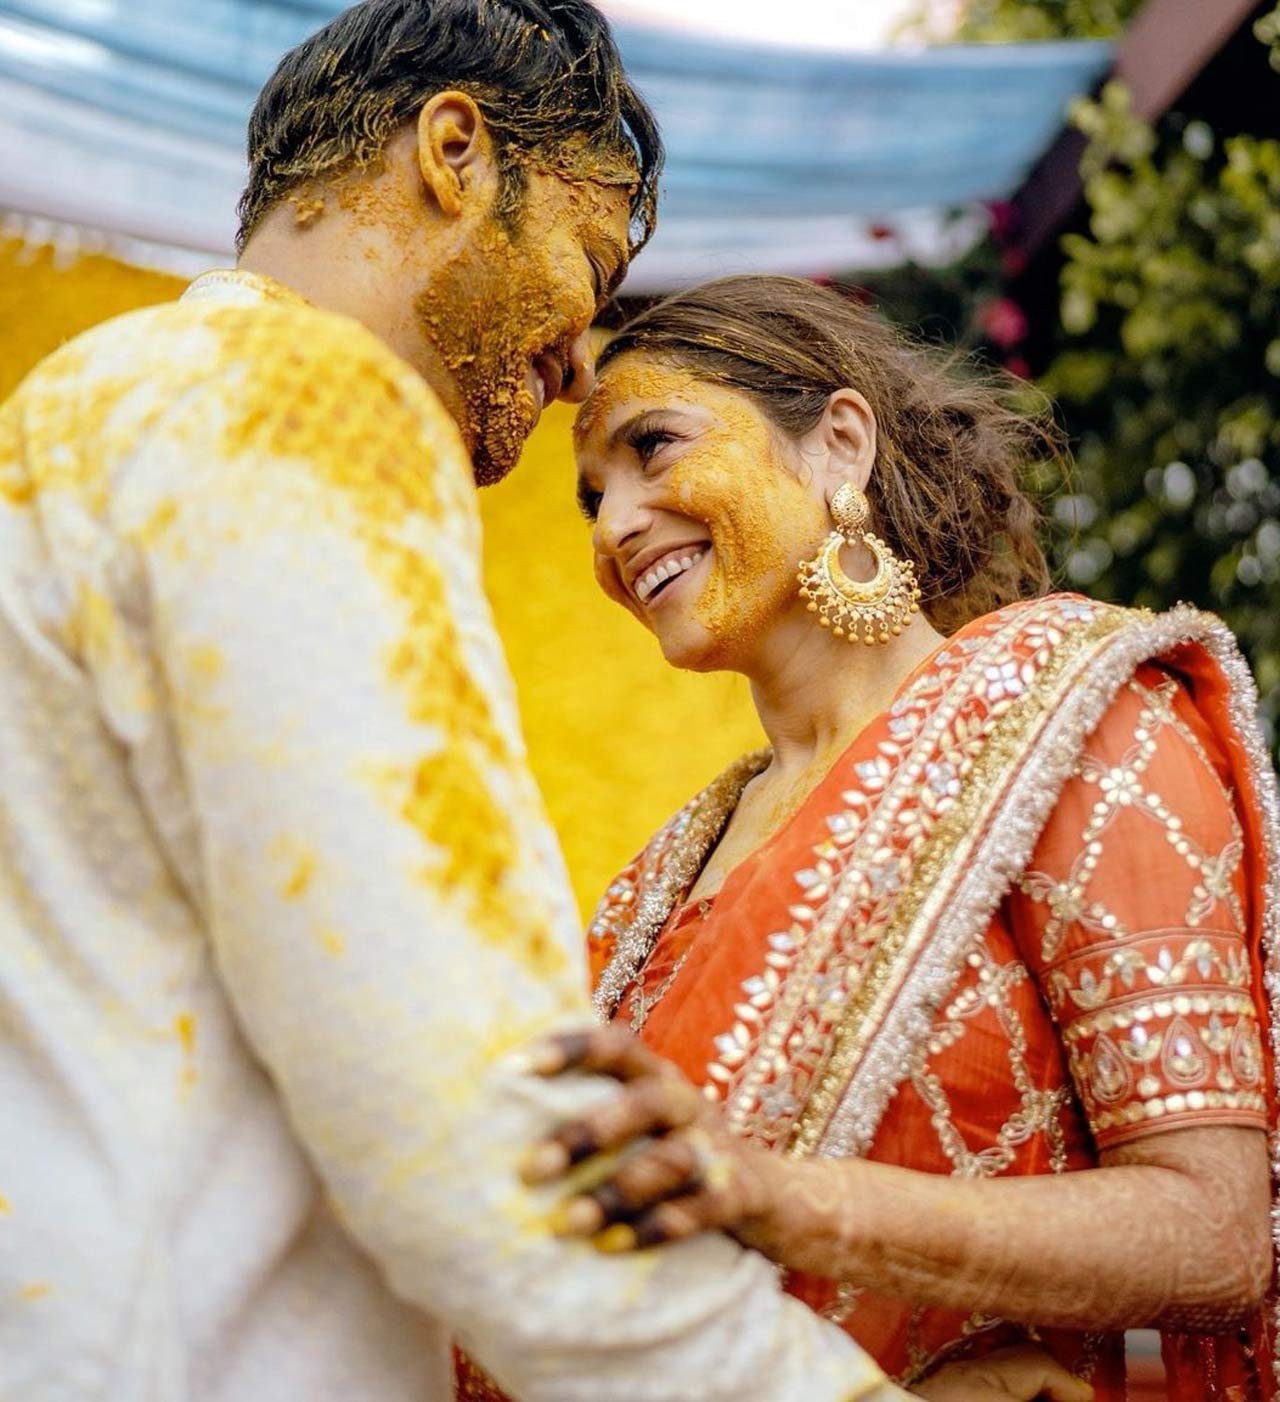 Several other pictures were shared from her 'Haldi' ceremony where the actress wrote: 